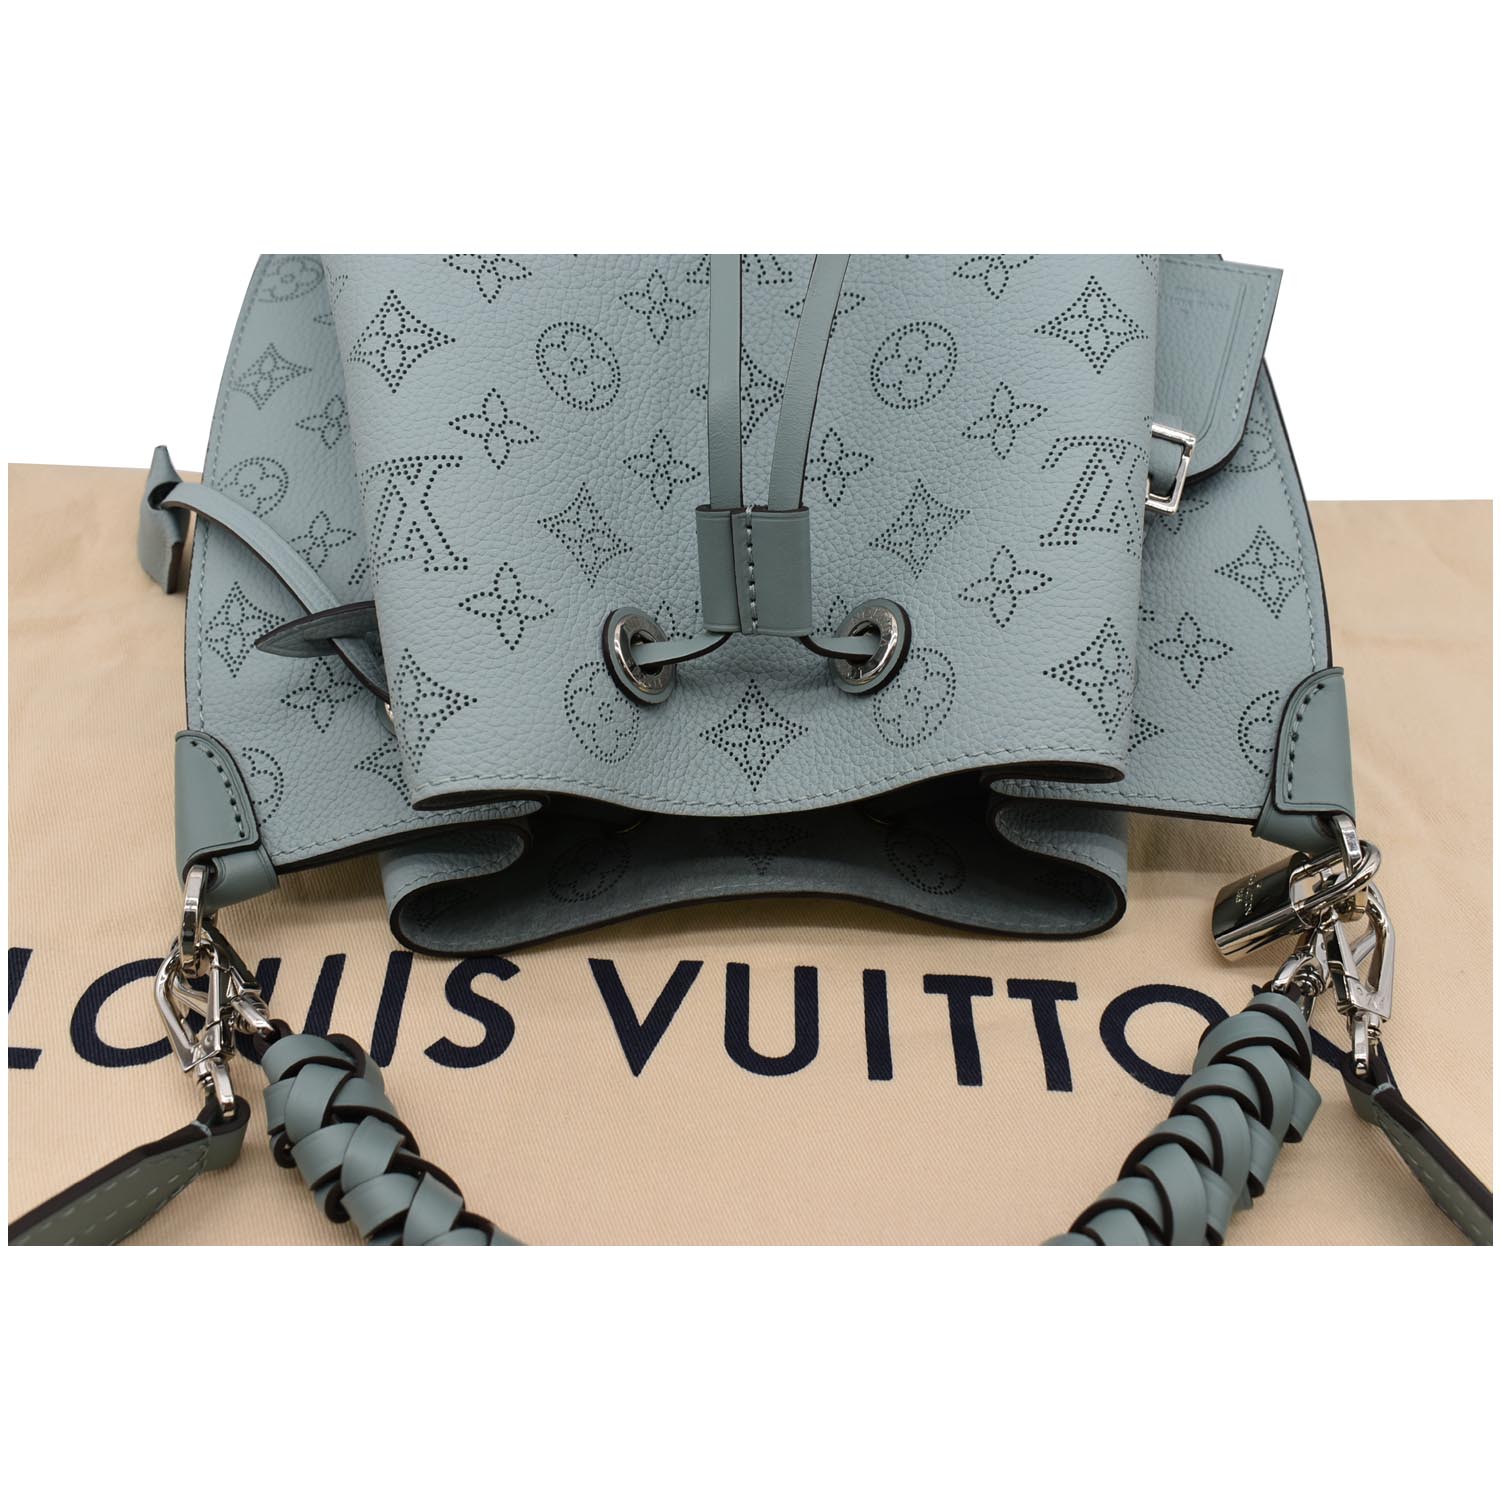 Authentic Louis Vuitton Muria Bucket Bag in Black Mahina Leather